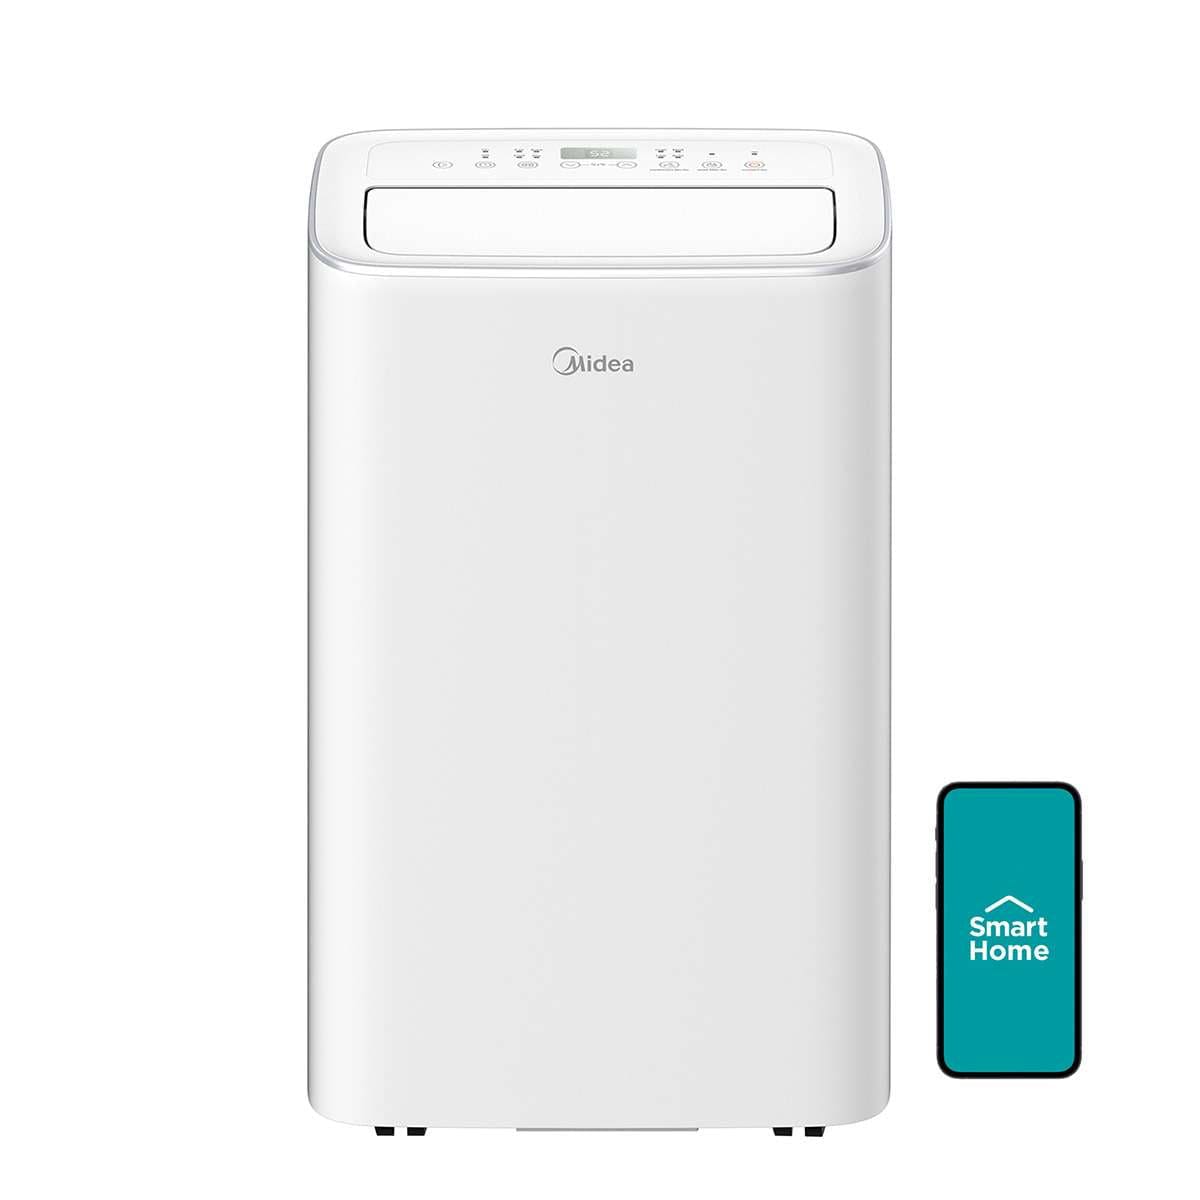 Midea 350 sq ft 8000 BTU Smart Programmable Portable 3-in-1 Air Conditioner - Seller Refurbished